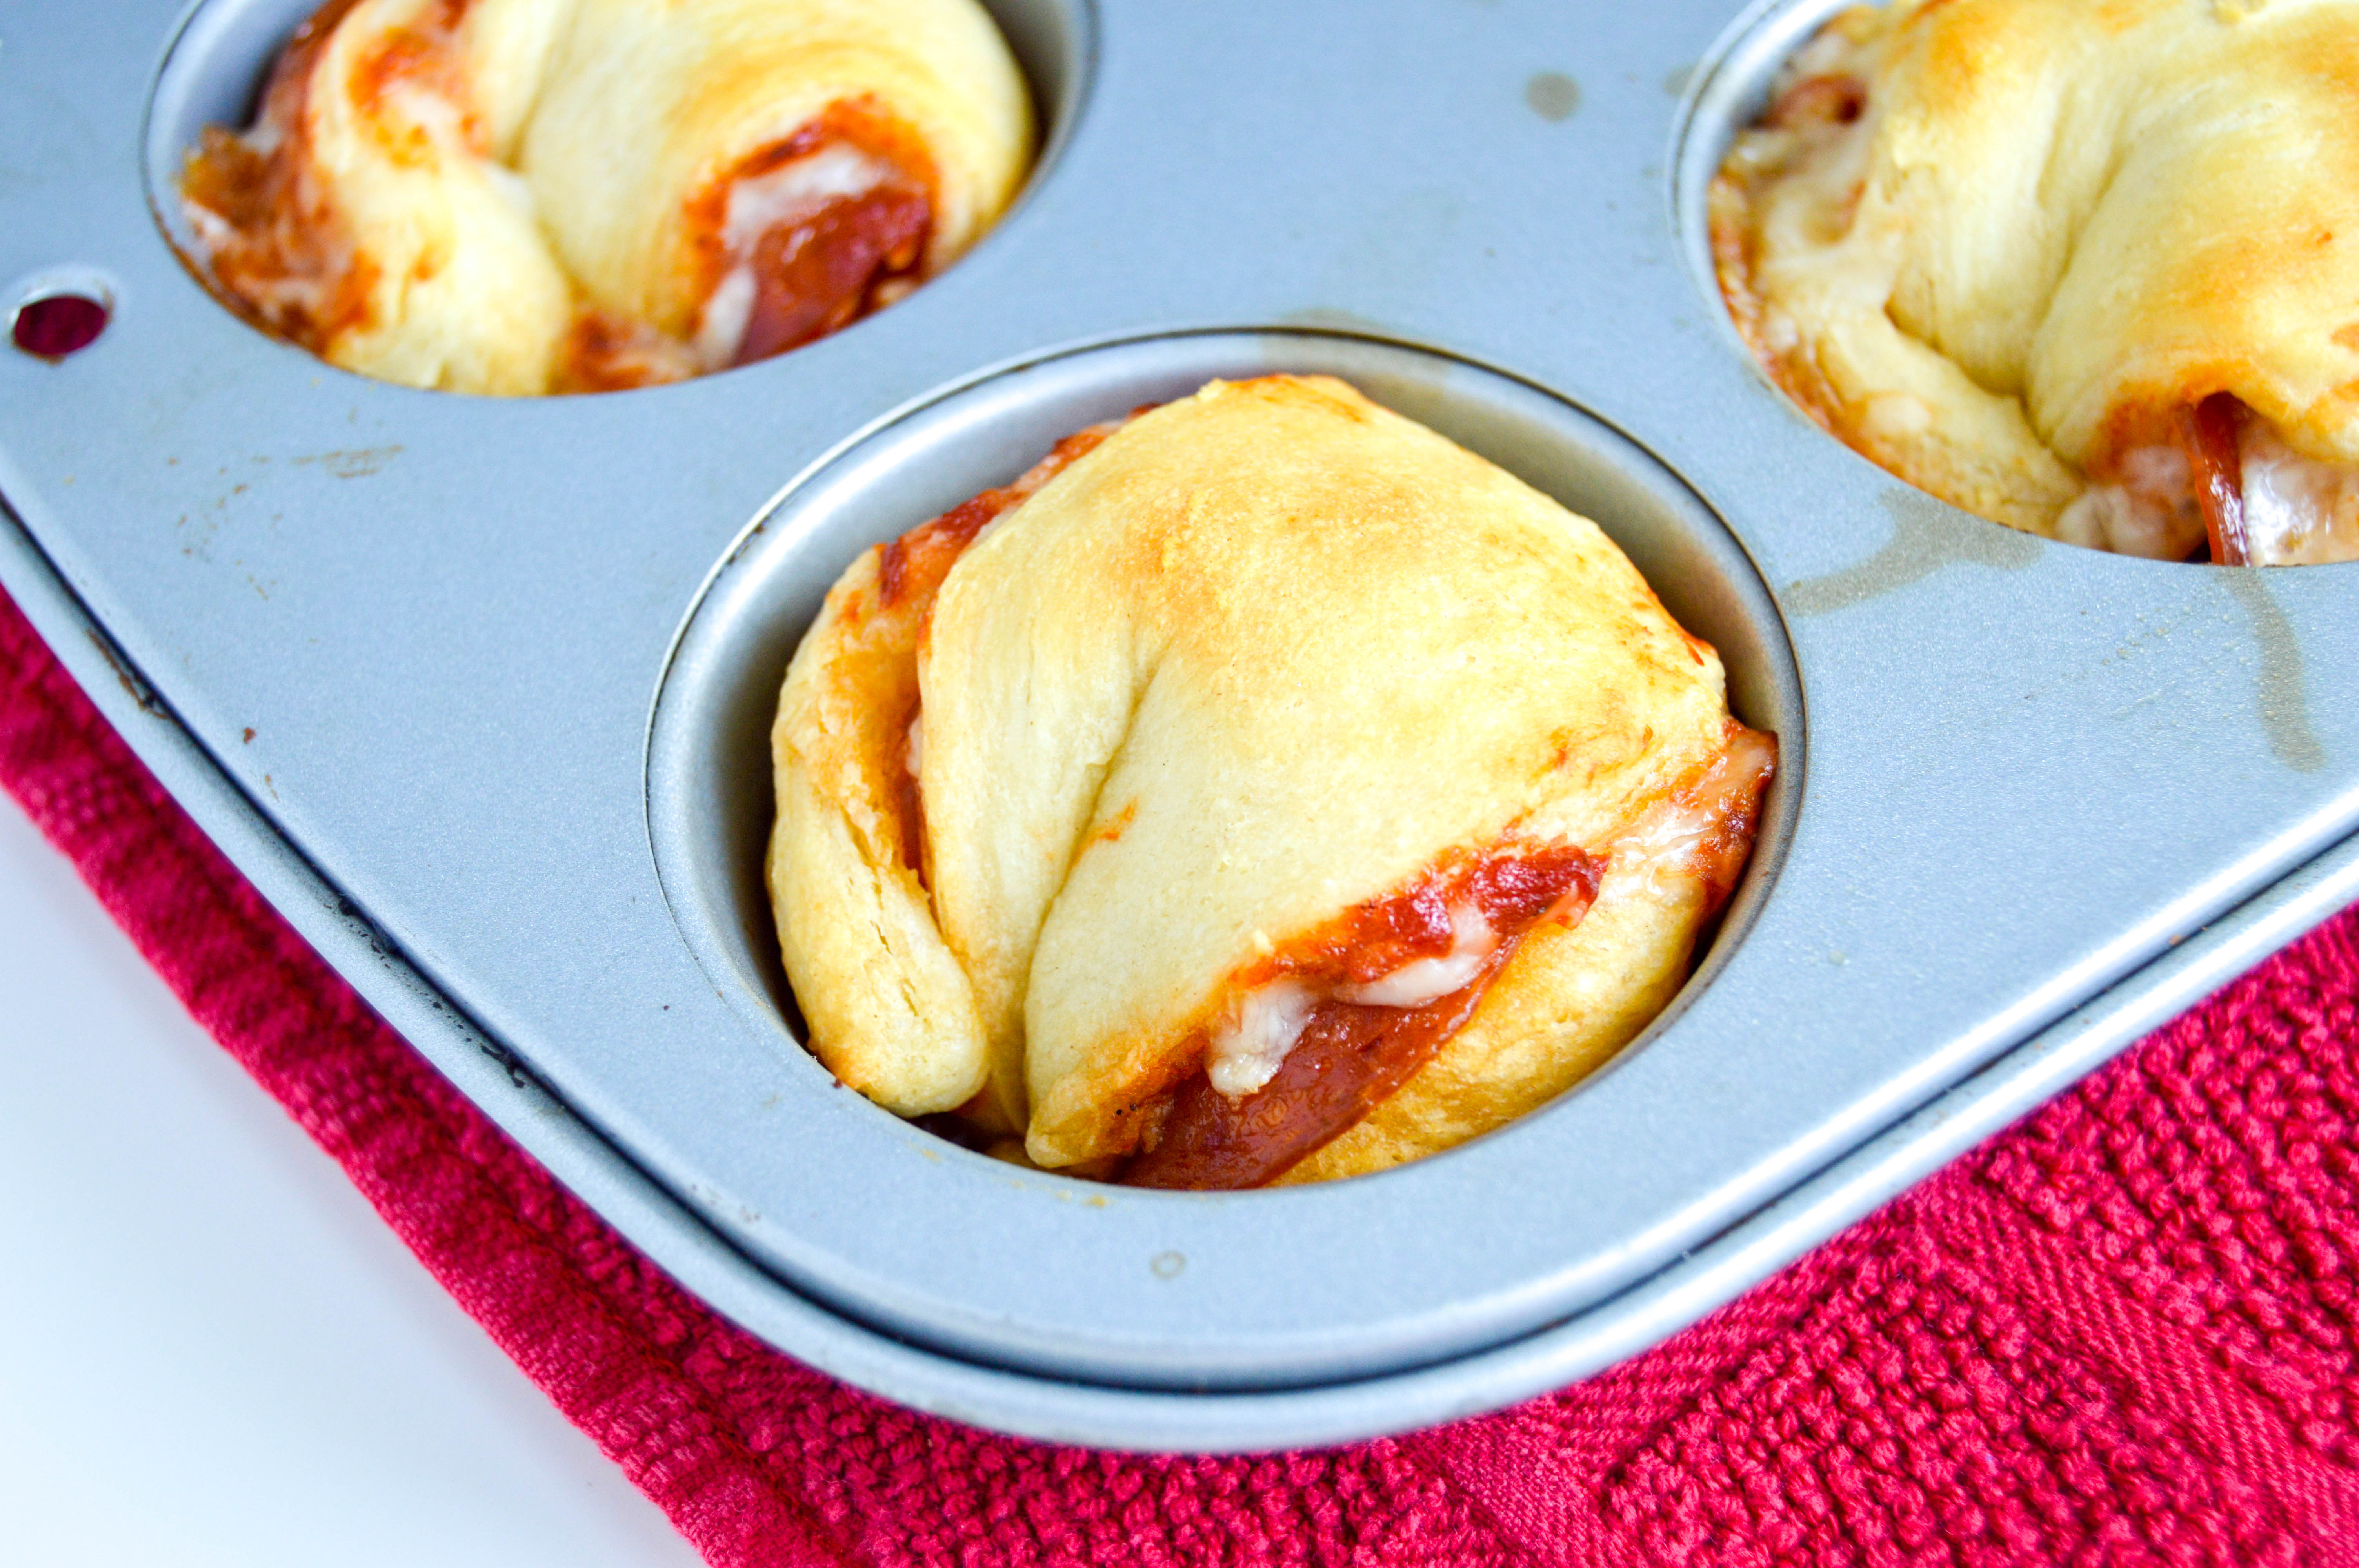 Pizza muffins are a super easy and cheap way to make pizza at home. Pre-made Crescent Dinner Roll dough and a few simple ingredients popped in a muffin tin and baked in the oven. Definitely a dinner the kids will love or the perfect savory party appetizer.